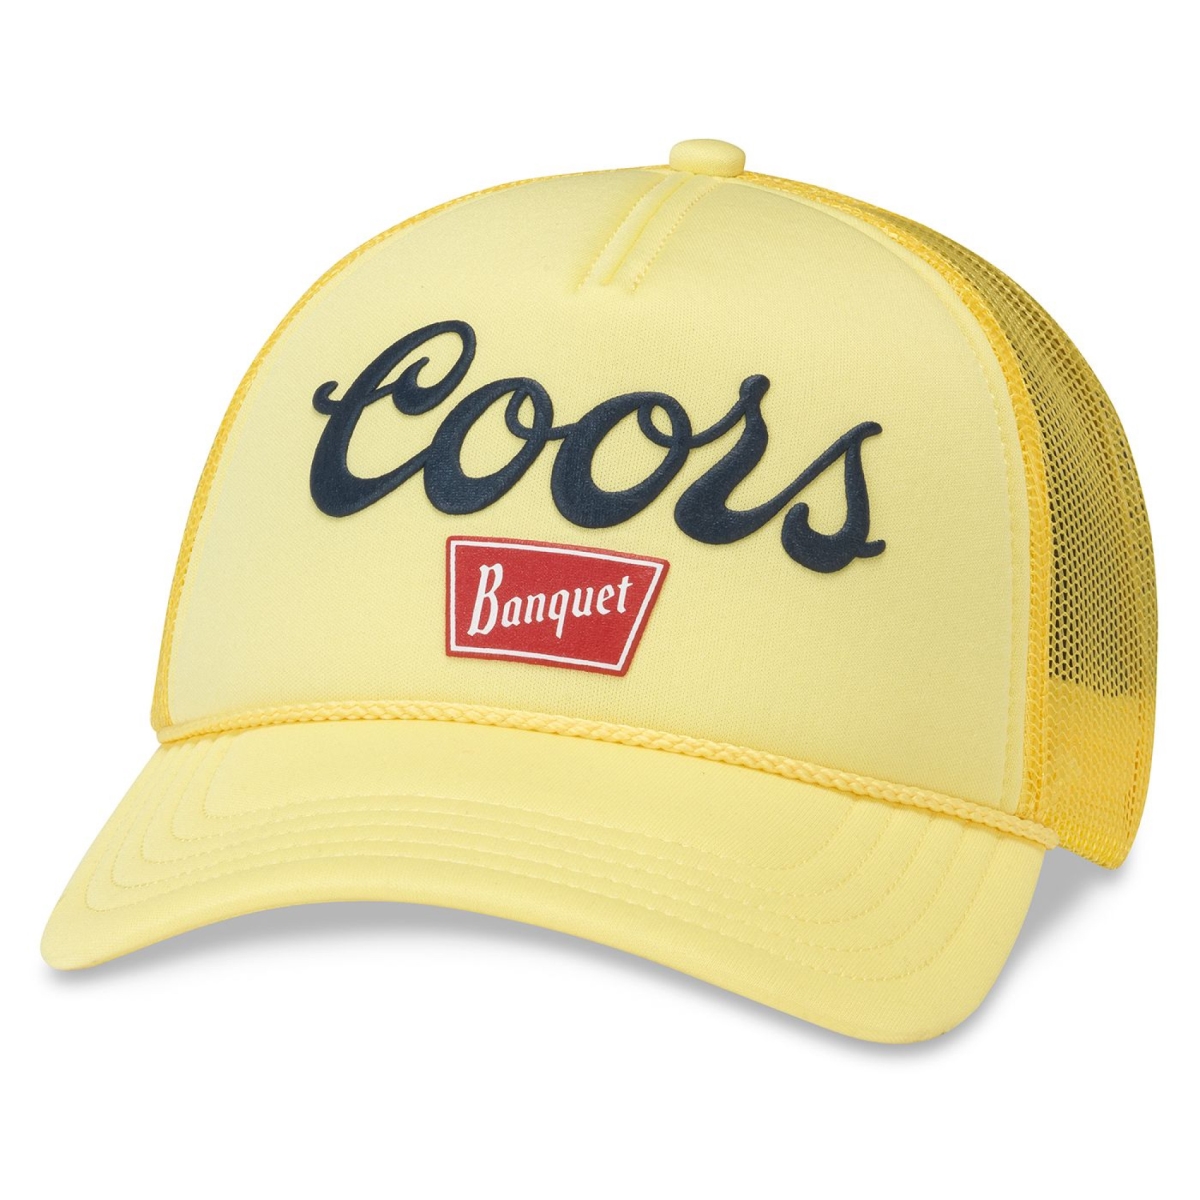 Picture of Coors 836430 Coors Banquet Logo Foamy Valin Snapback Hat